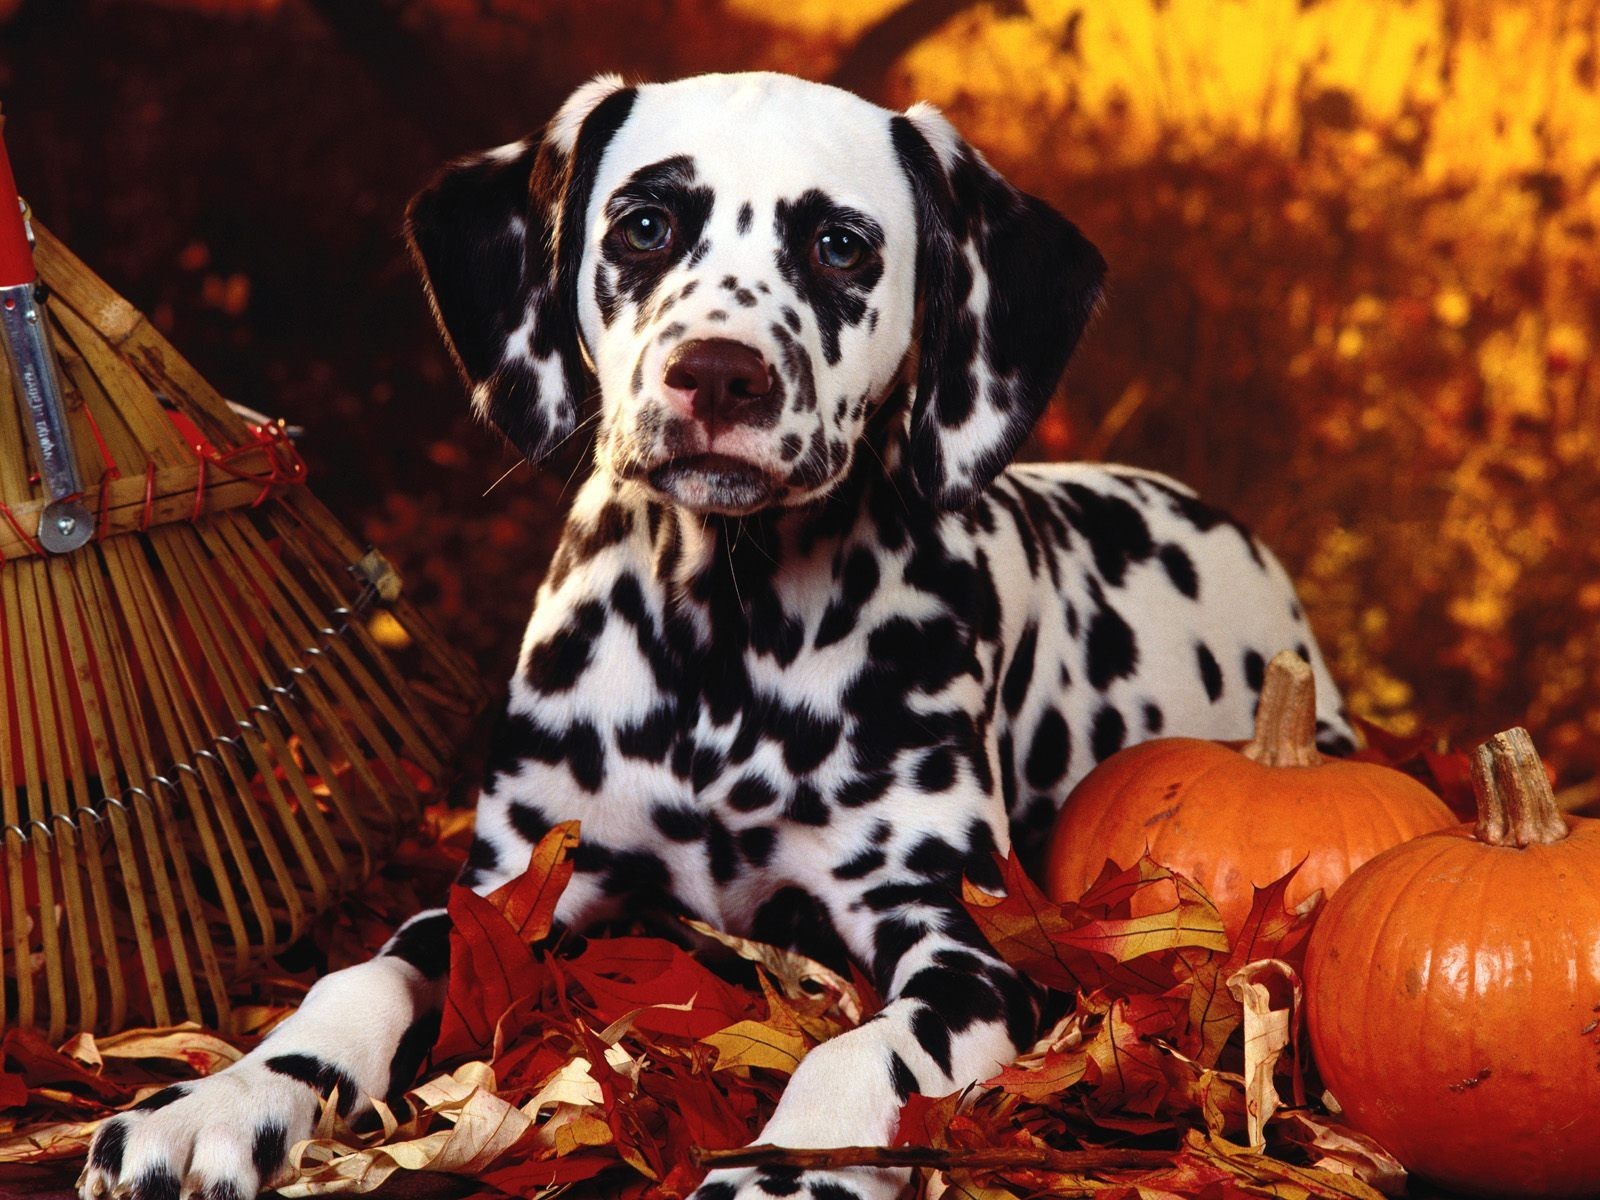 Dalmatian in the halloween theme wallpapers and images